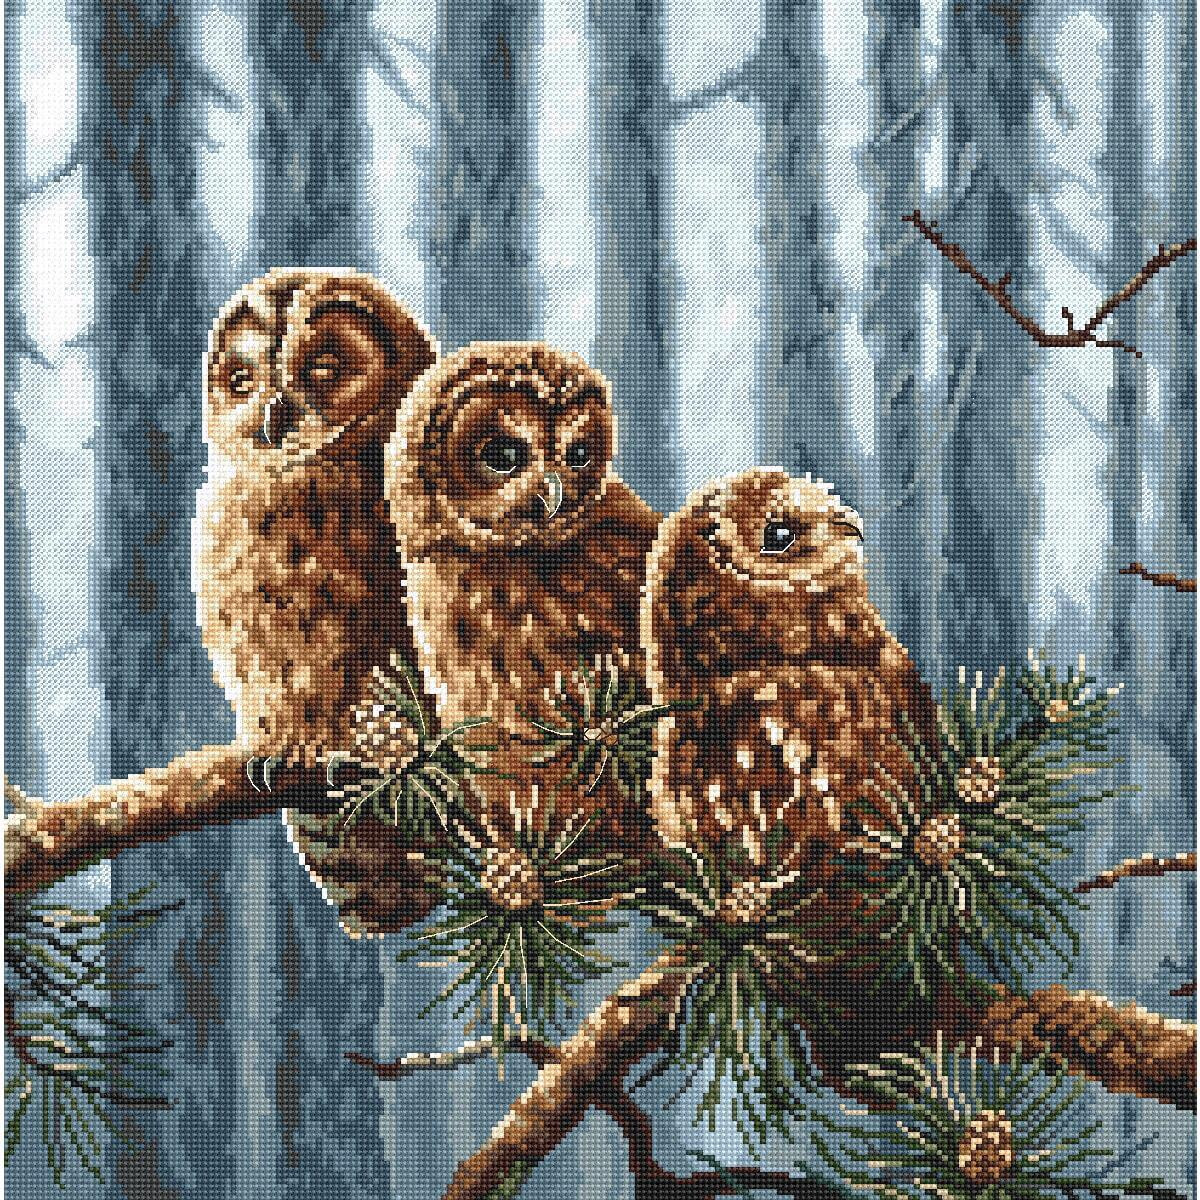 Three fluffy brown owls with large eyes sit close...